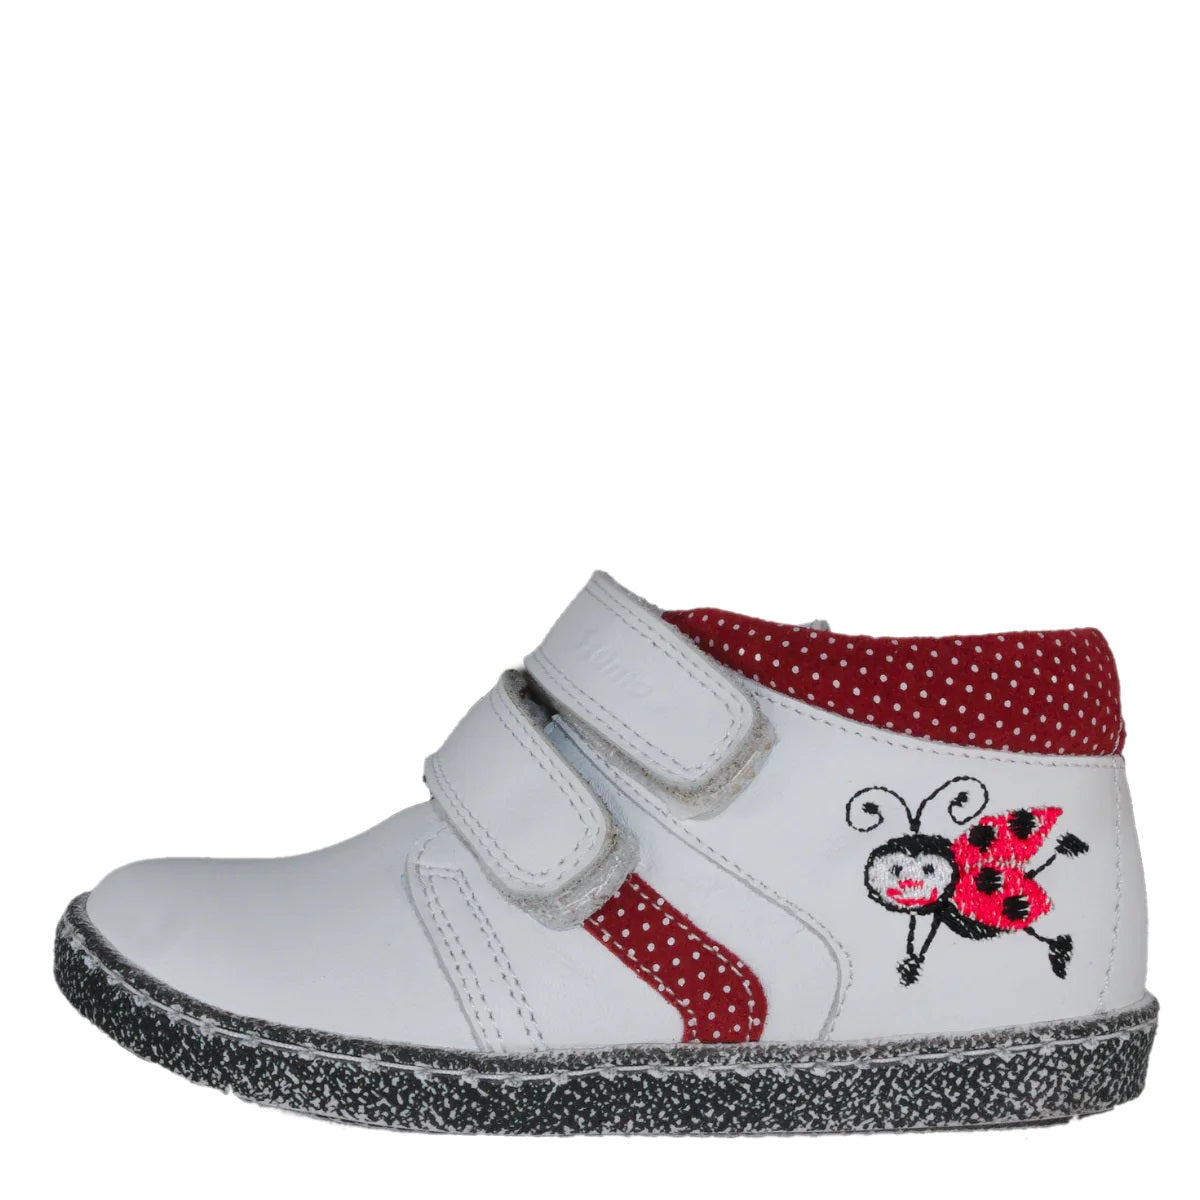 Szamos kid girl sneakers white with ladybird decor and polka dots and double velcro strap toddler size